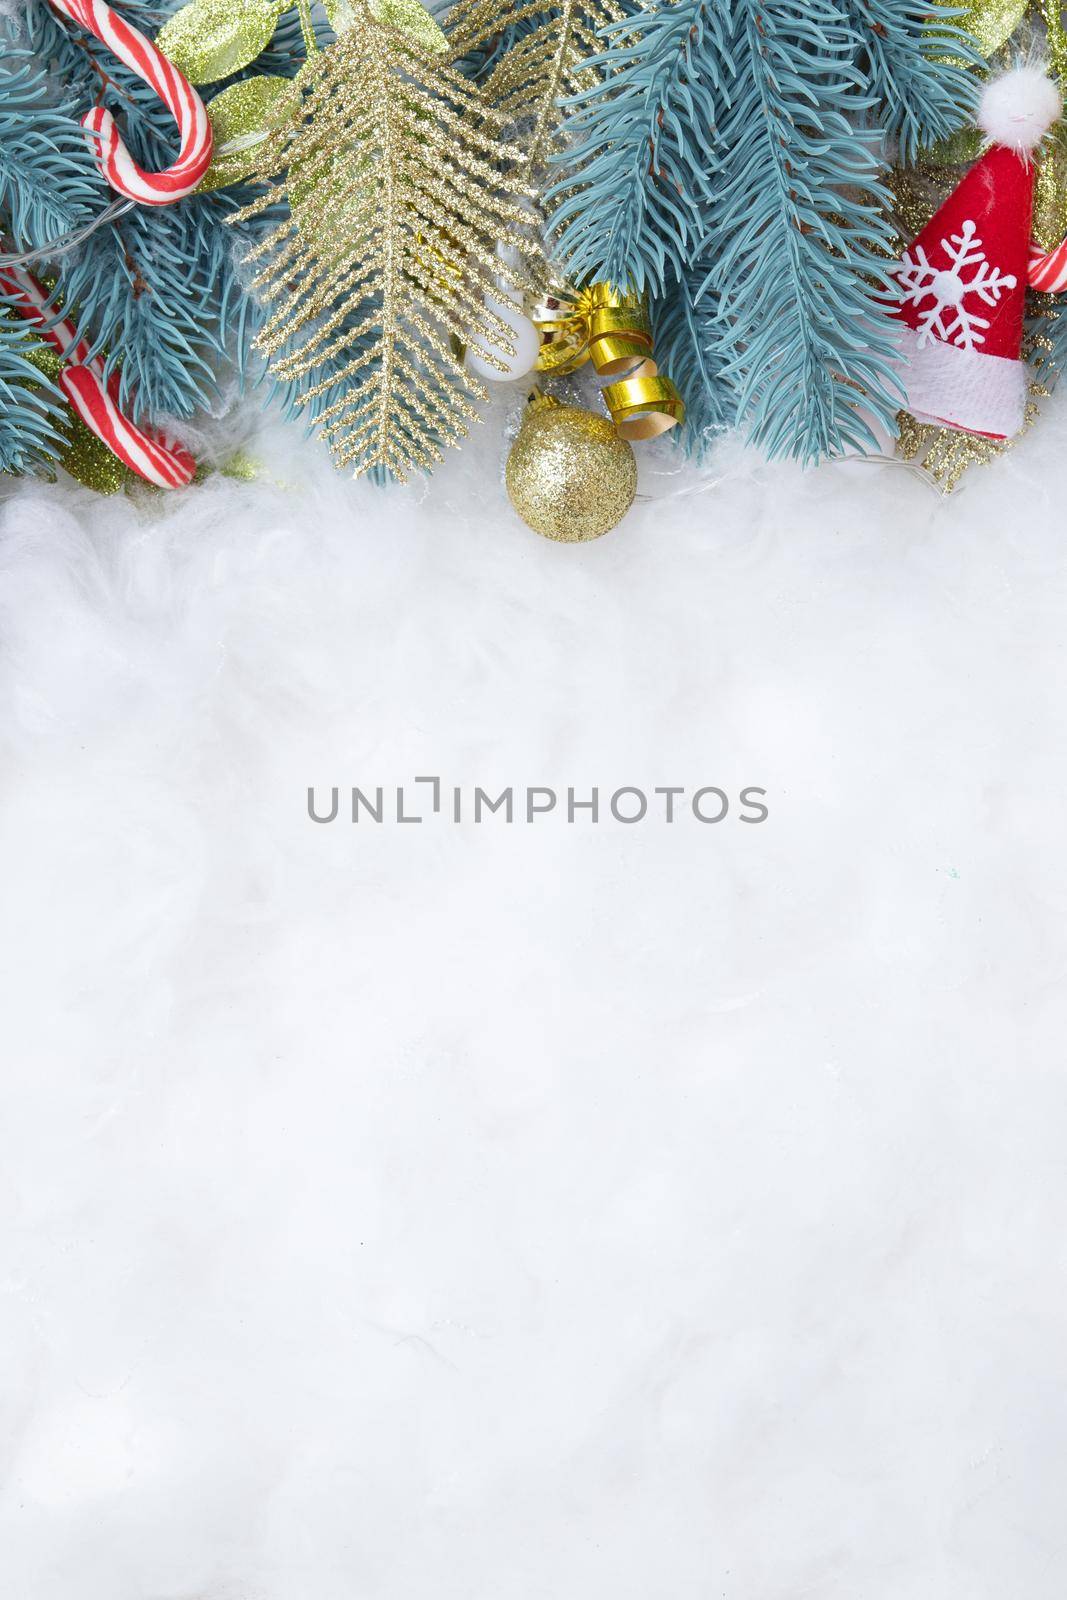 Frame made of fir branch and Christmas decorations flat lay on a snowy background with copy space vertical format